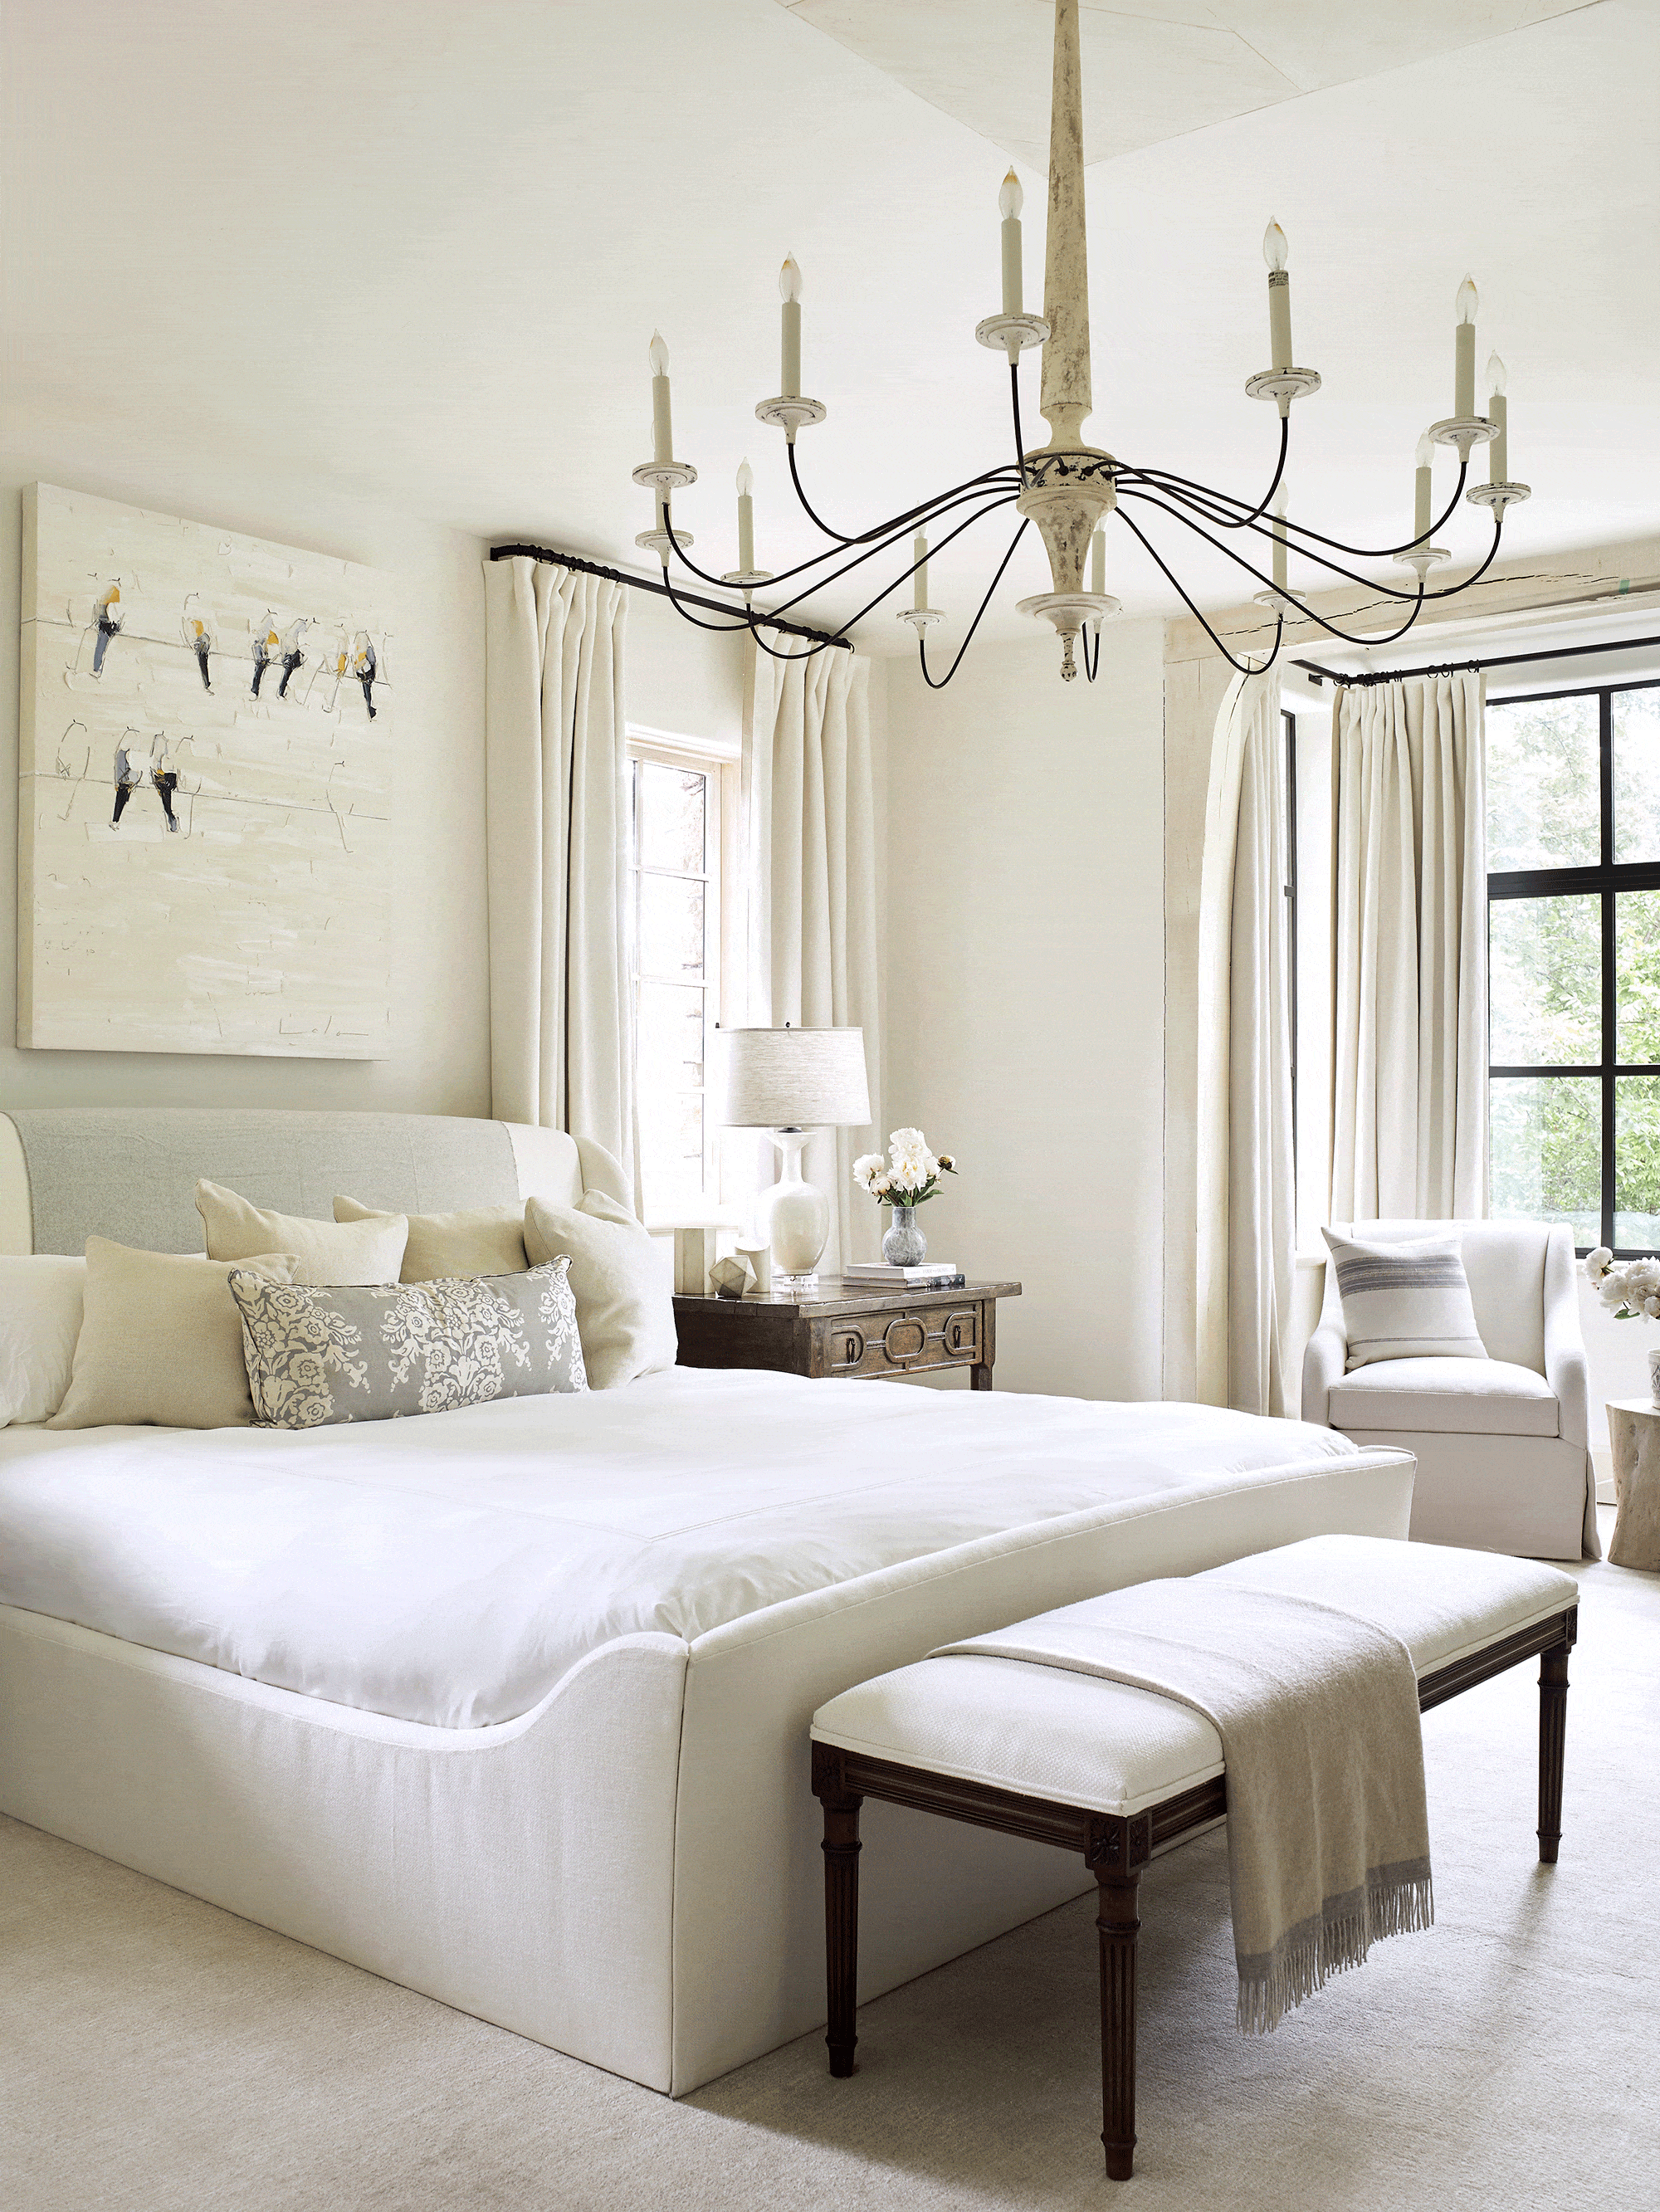 23 beautiful white bedrooms - ideas for white bedroom design